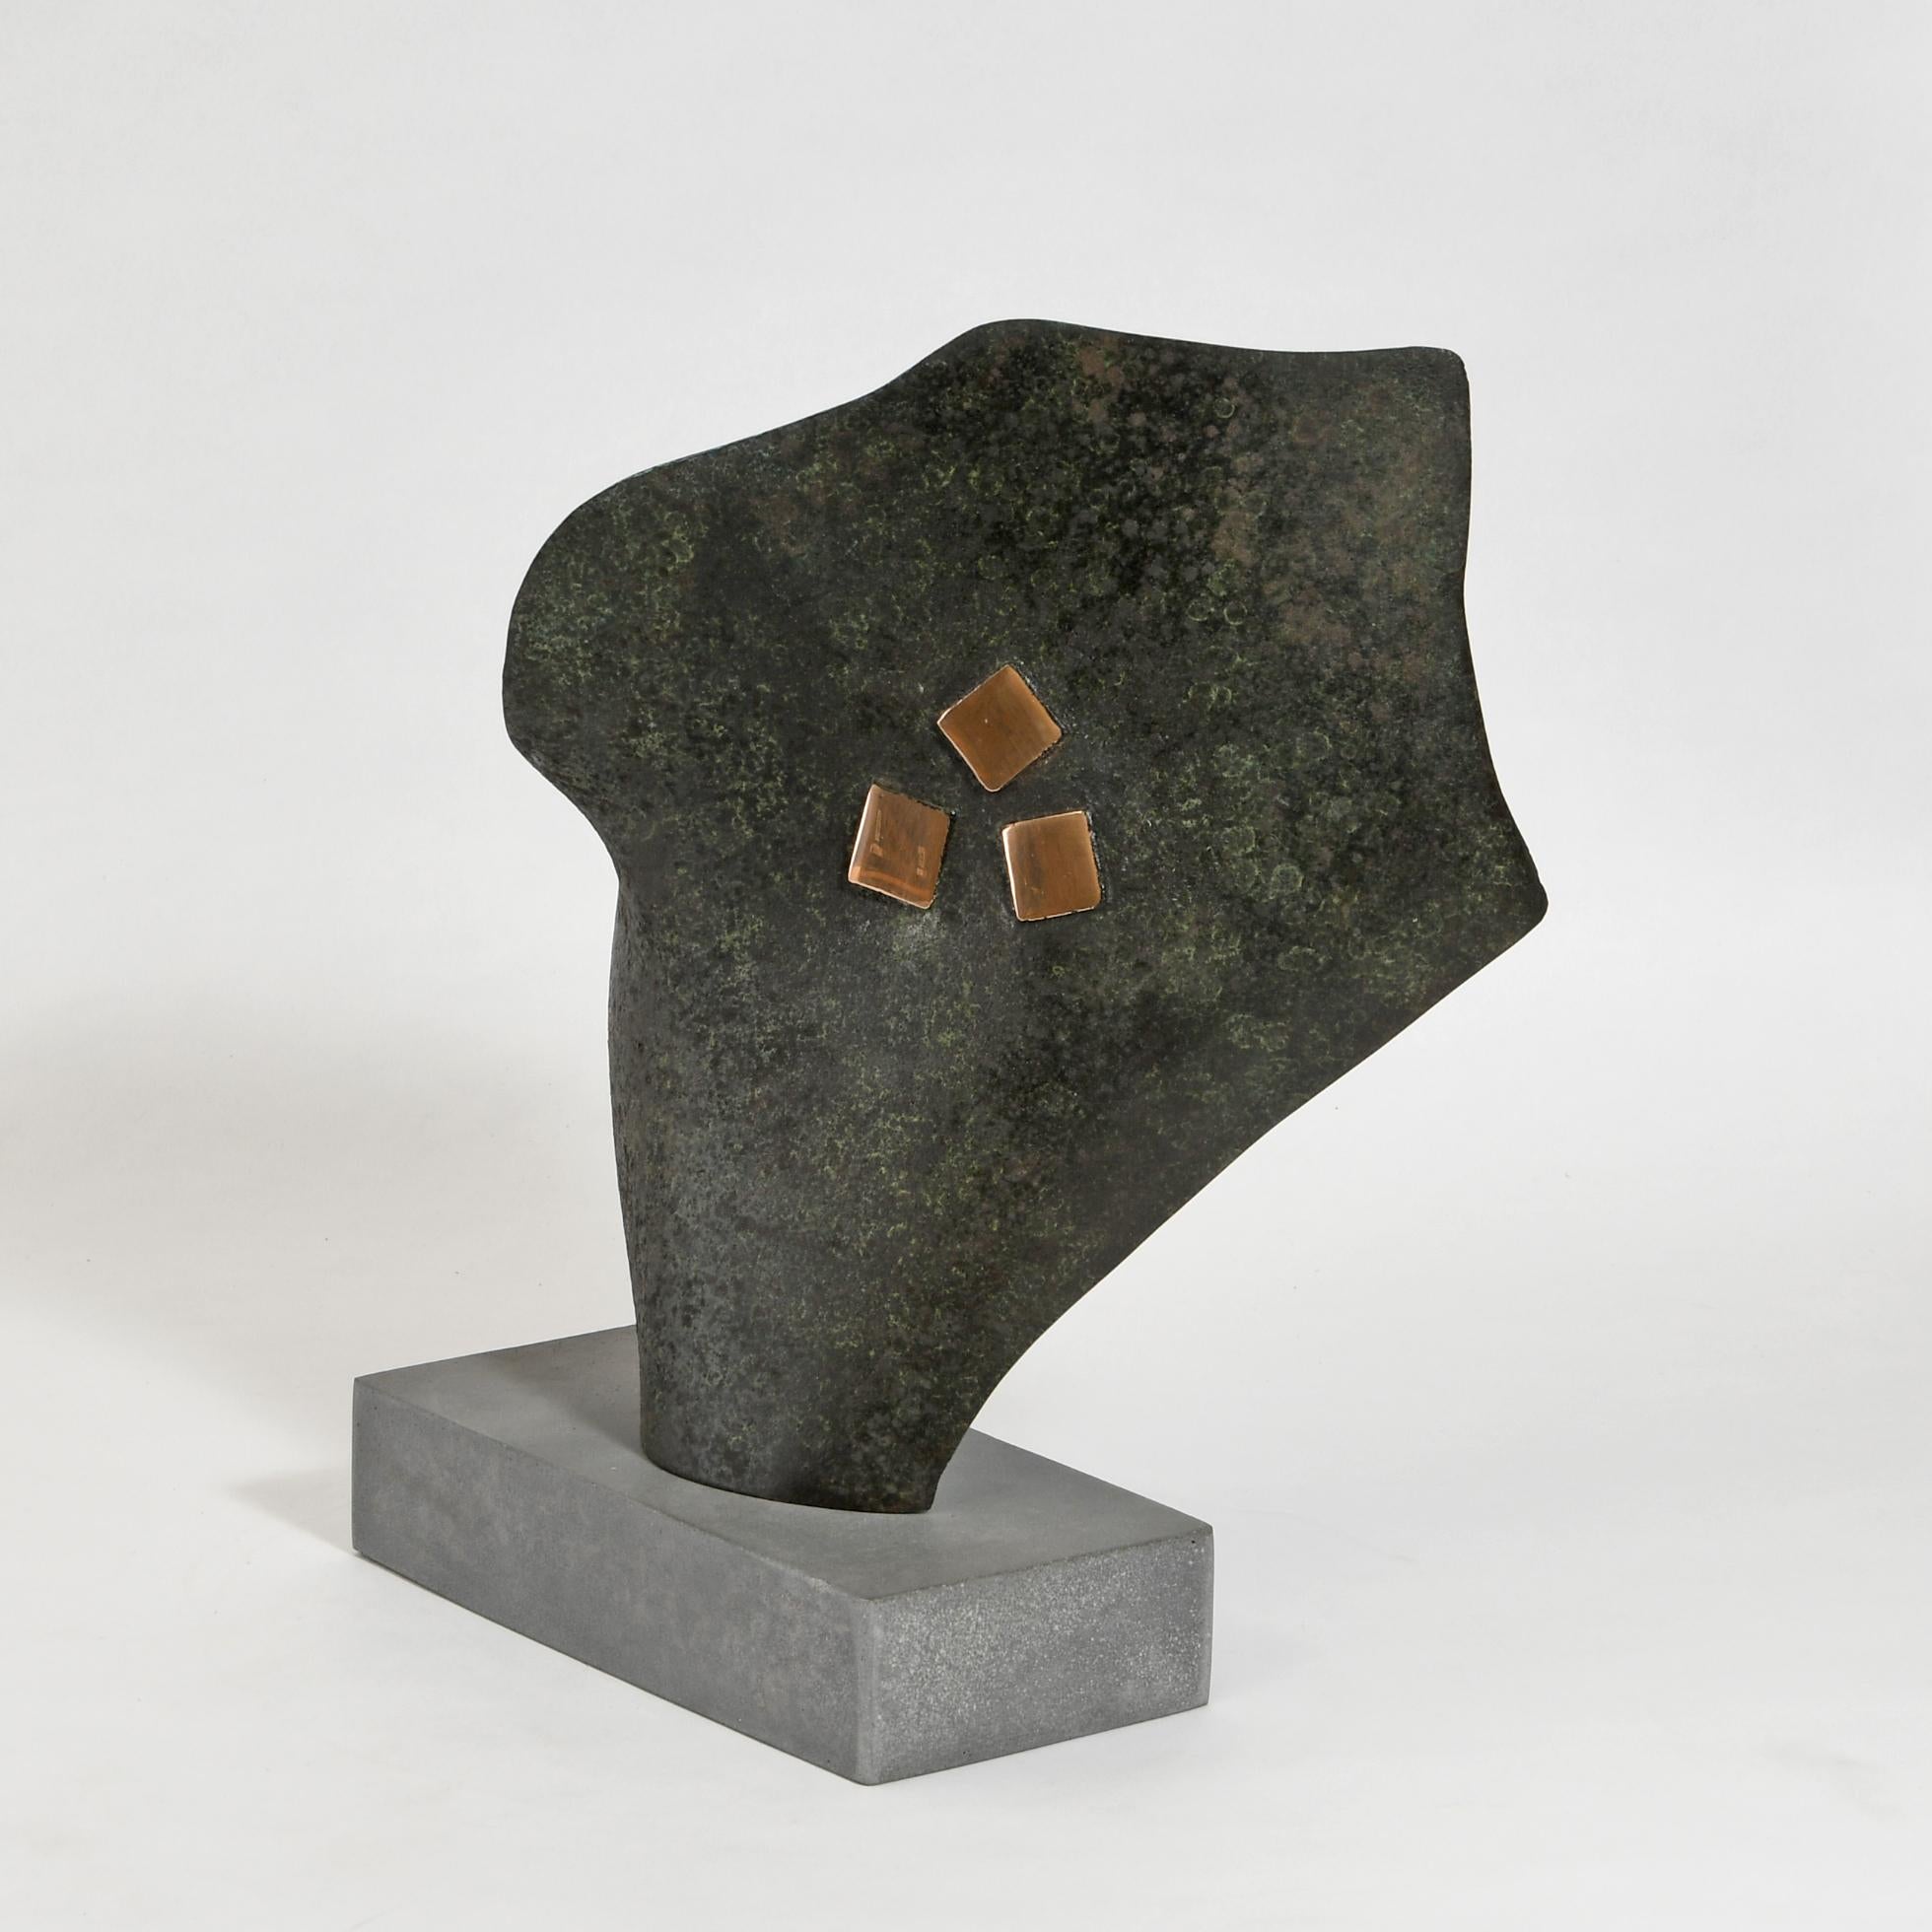 British Contemporary Sculpture by Philip Hearsey - Trilogy A